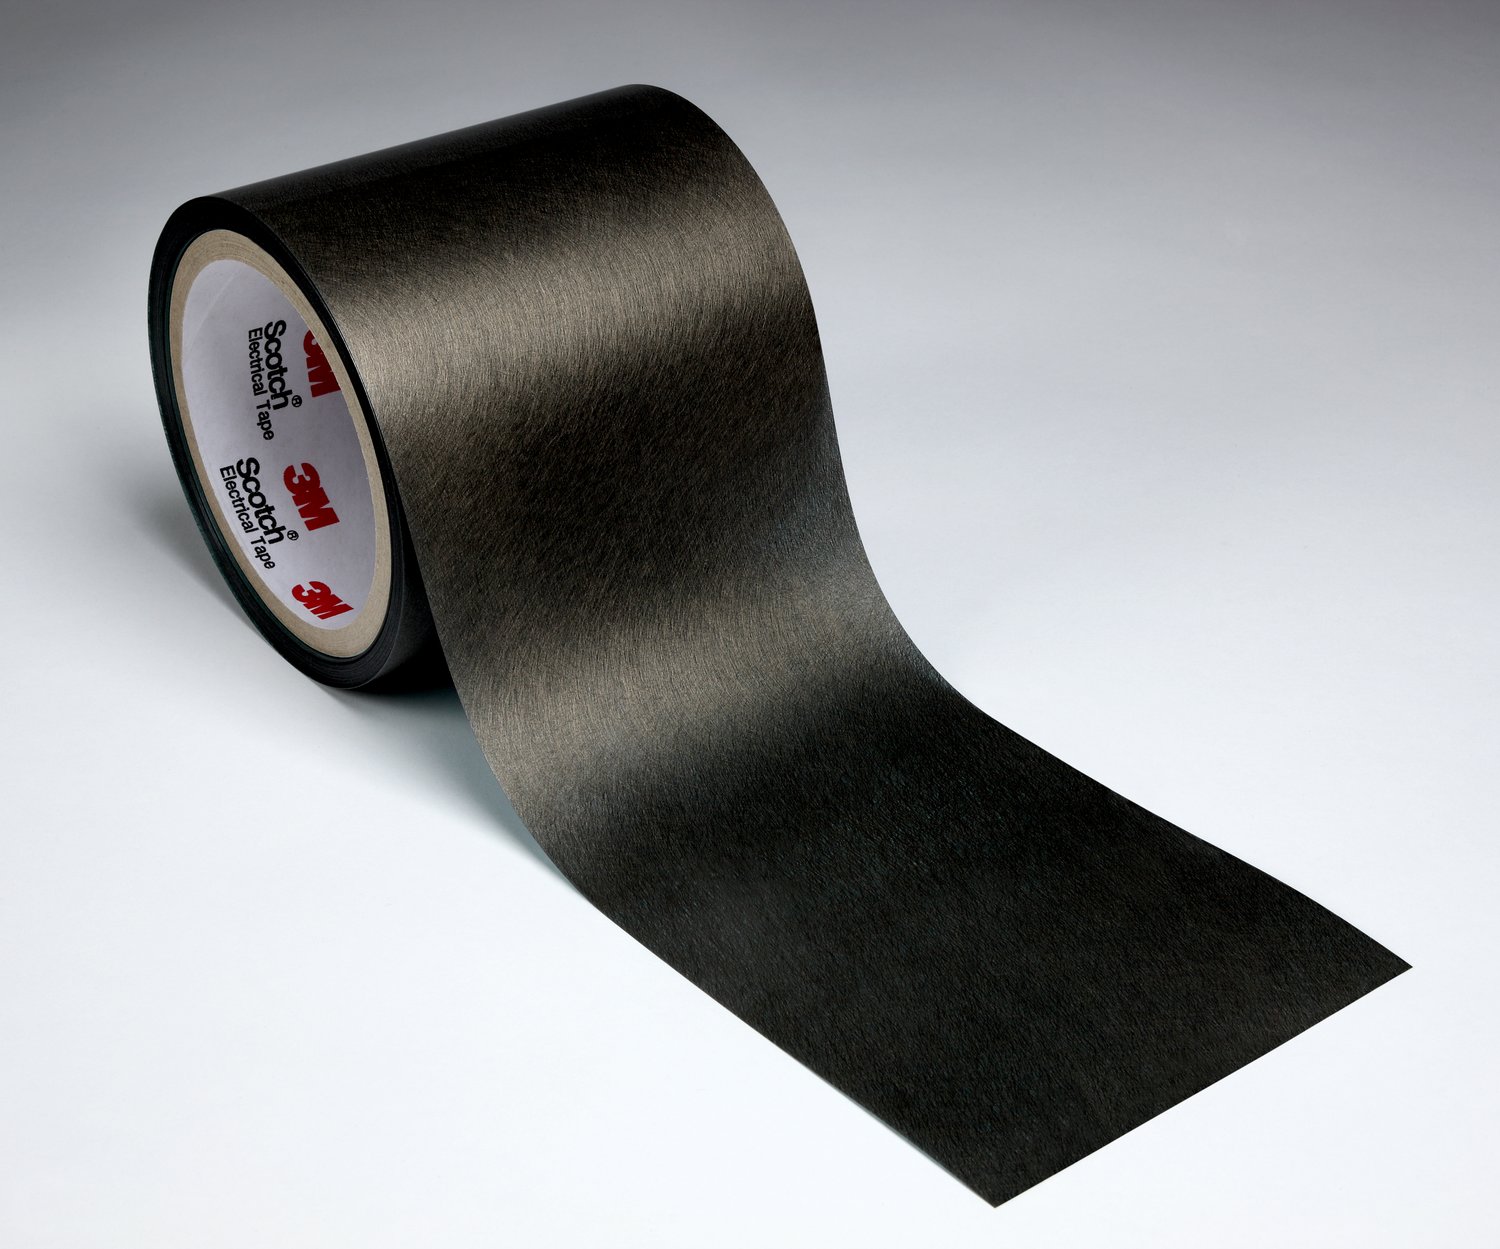 7010405215 - 3M XYZ-Axis Electrically Conductive Adhesive Transfer Tape 9720S, 500
mm x 100 m, 30 um